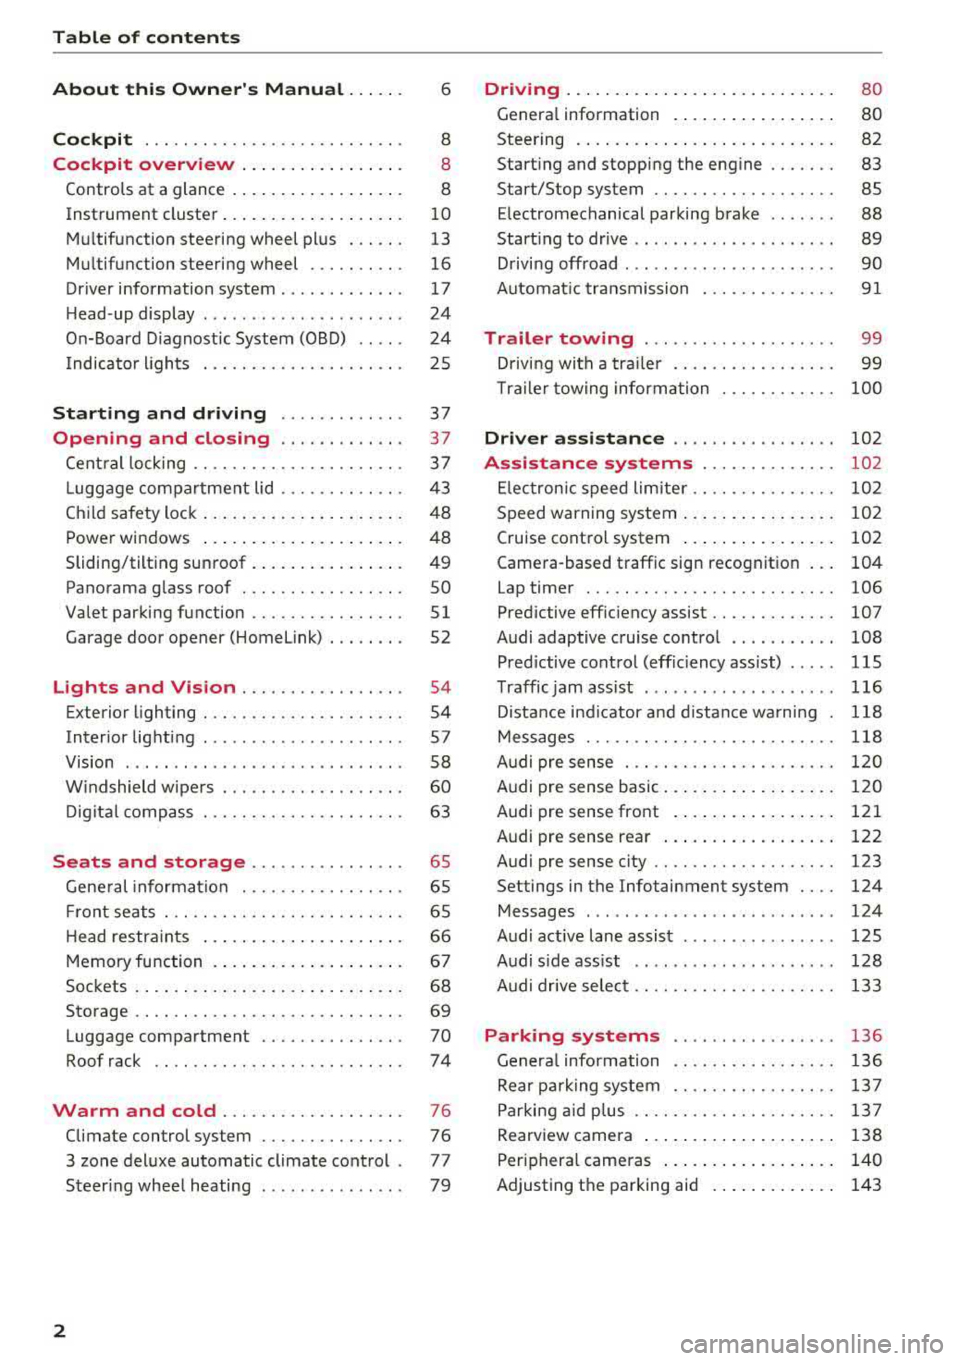 AUDI S4 2018  Owners Manual Table  of  contents  
About  this  Owners  Manual  . .. .. . 
Cockpit  ... .. ............... .... ..  . 
Cockpit  overview  ................ . 
Controls  at  a glance  ... .......... .. .. . 
Instru